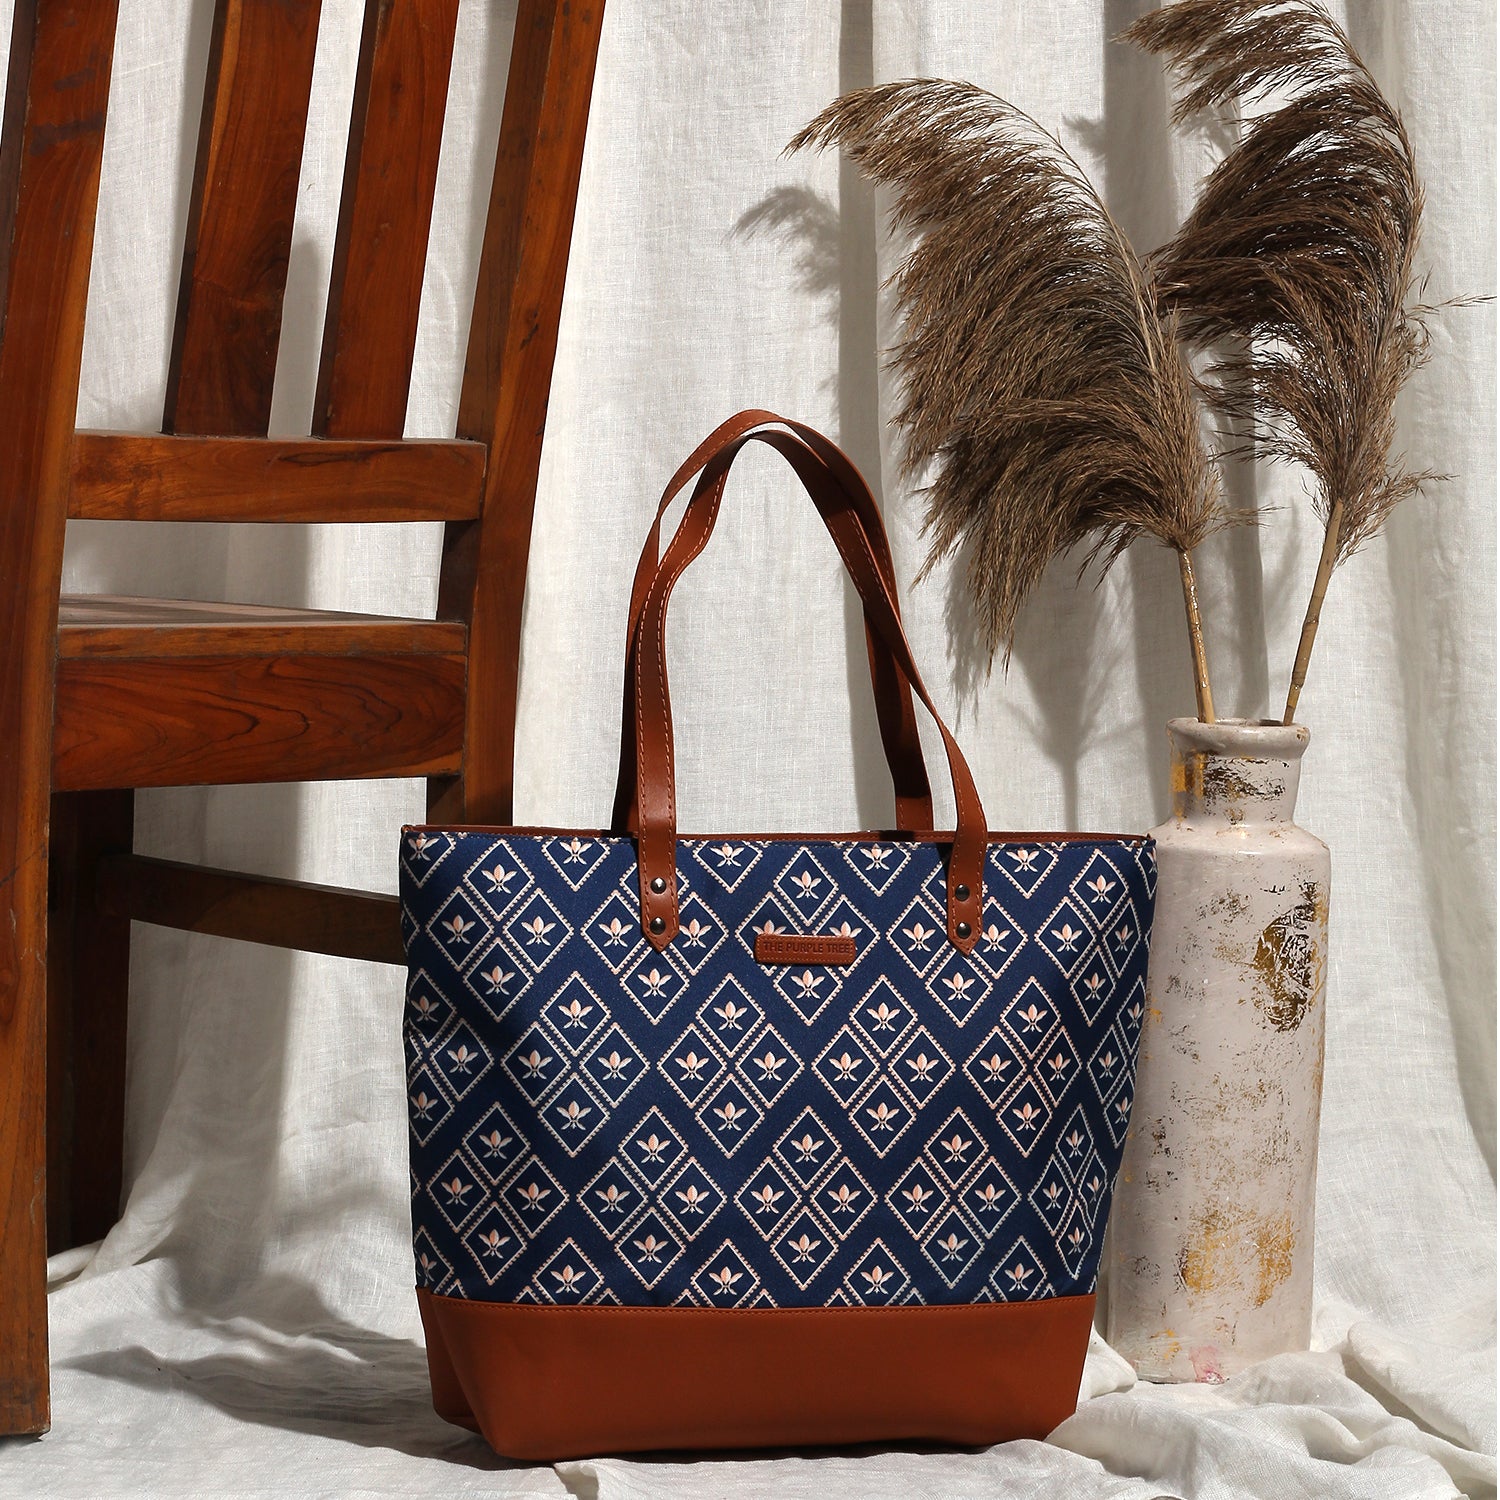 A stylish tote bag in blue and brown, placed next to a wooden chair. Perfect for carrying your essentials in style.